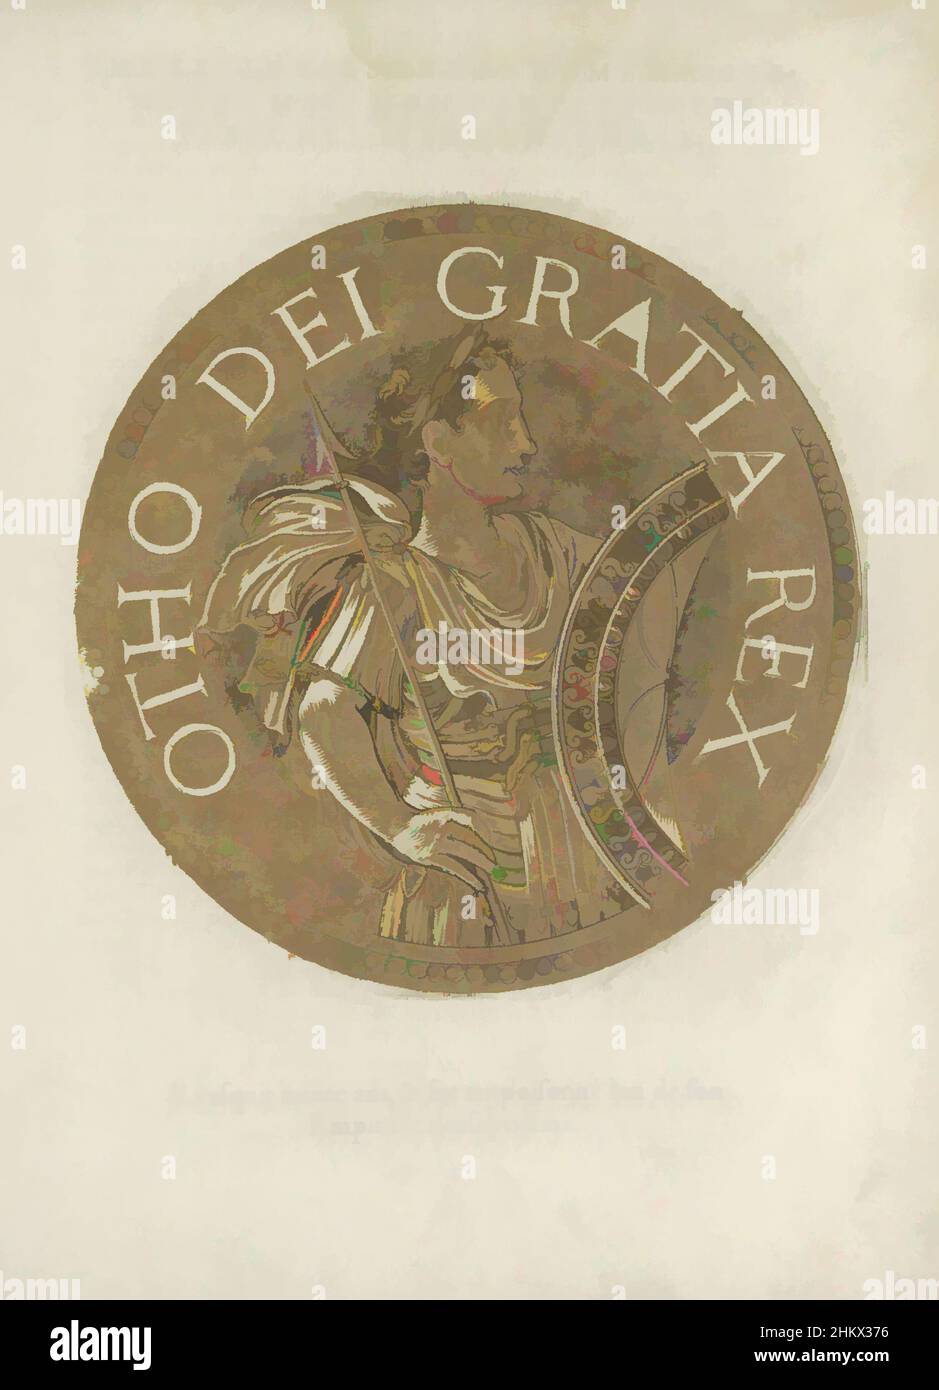 Art inspired by Portrait of Emperor Otto IIILes images presque de tous les empereurs (series title), Portrait of Emperor Otto III, on a coin with edge lettering. The print is part of a book on the emperors from Julius Caesar to Charles V and his brother Ferdinand., Joos Gietleughen, Classic works modernized by Artotop with a splash of modernity. Shapes, color and value, eye-catching visual impact on art. Emotions through freedom of artworks in a contemporary way. A timeless message pursuing a wildly creative new direction. Artists turning to the digital medium and creating the Artotop NFT Stock Photo